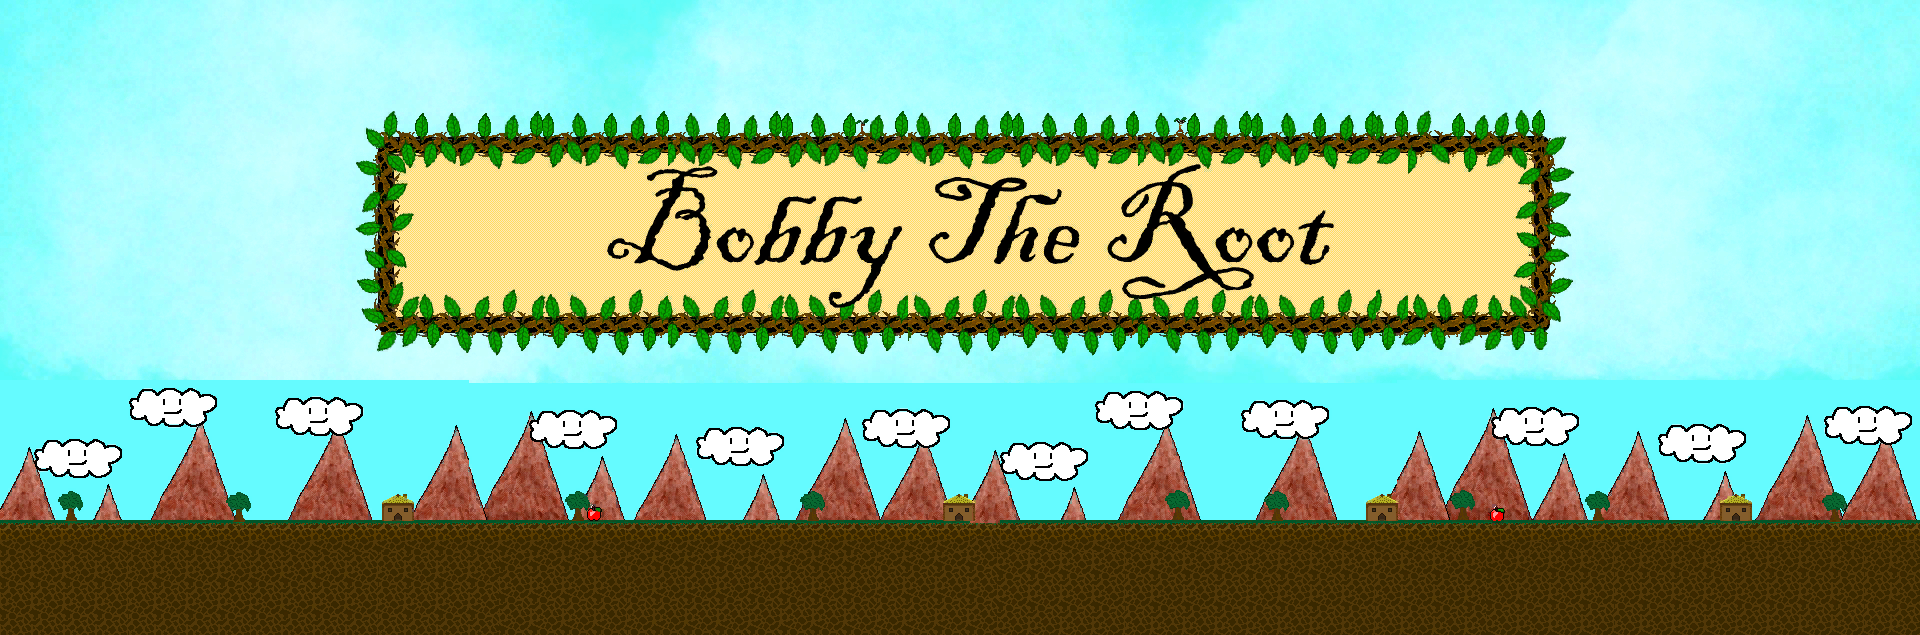 Bobby The Root